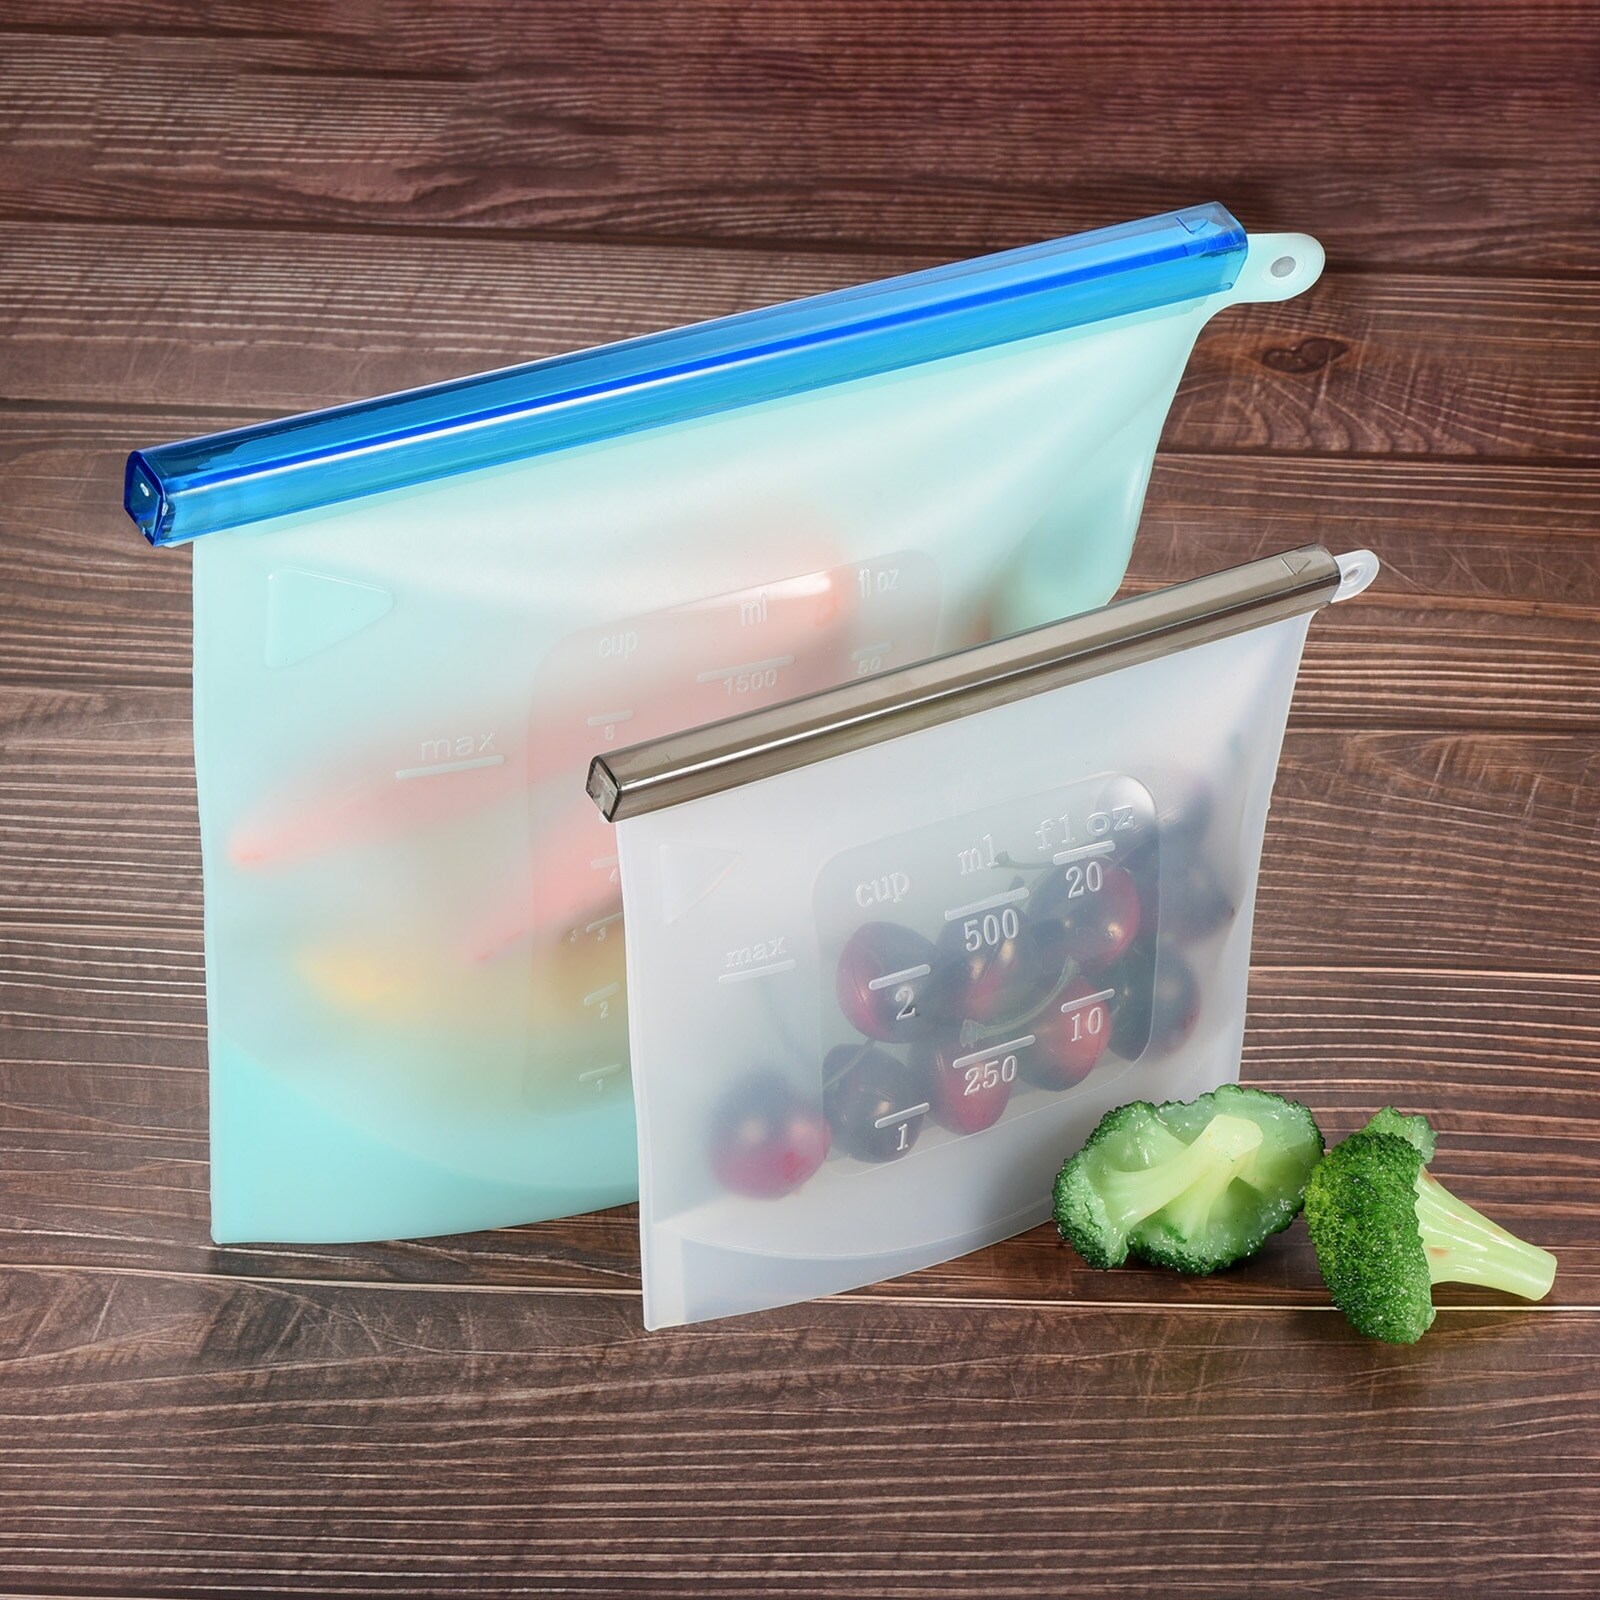 https://ak1.ostkcdn.com/images/products/is/images/direct/76014779ff6a1940b74096b6679e4d1c2dcb13f0/Silicone-Storage-Bags-Reusable-Food-Storage-Containers-Freezer-Bags-White%2BRed.jpg